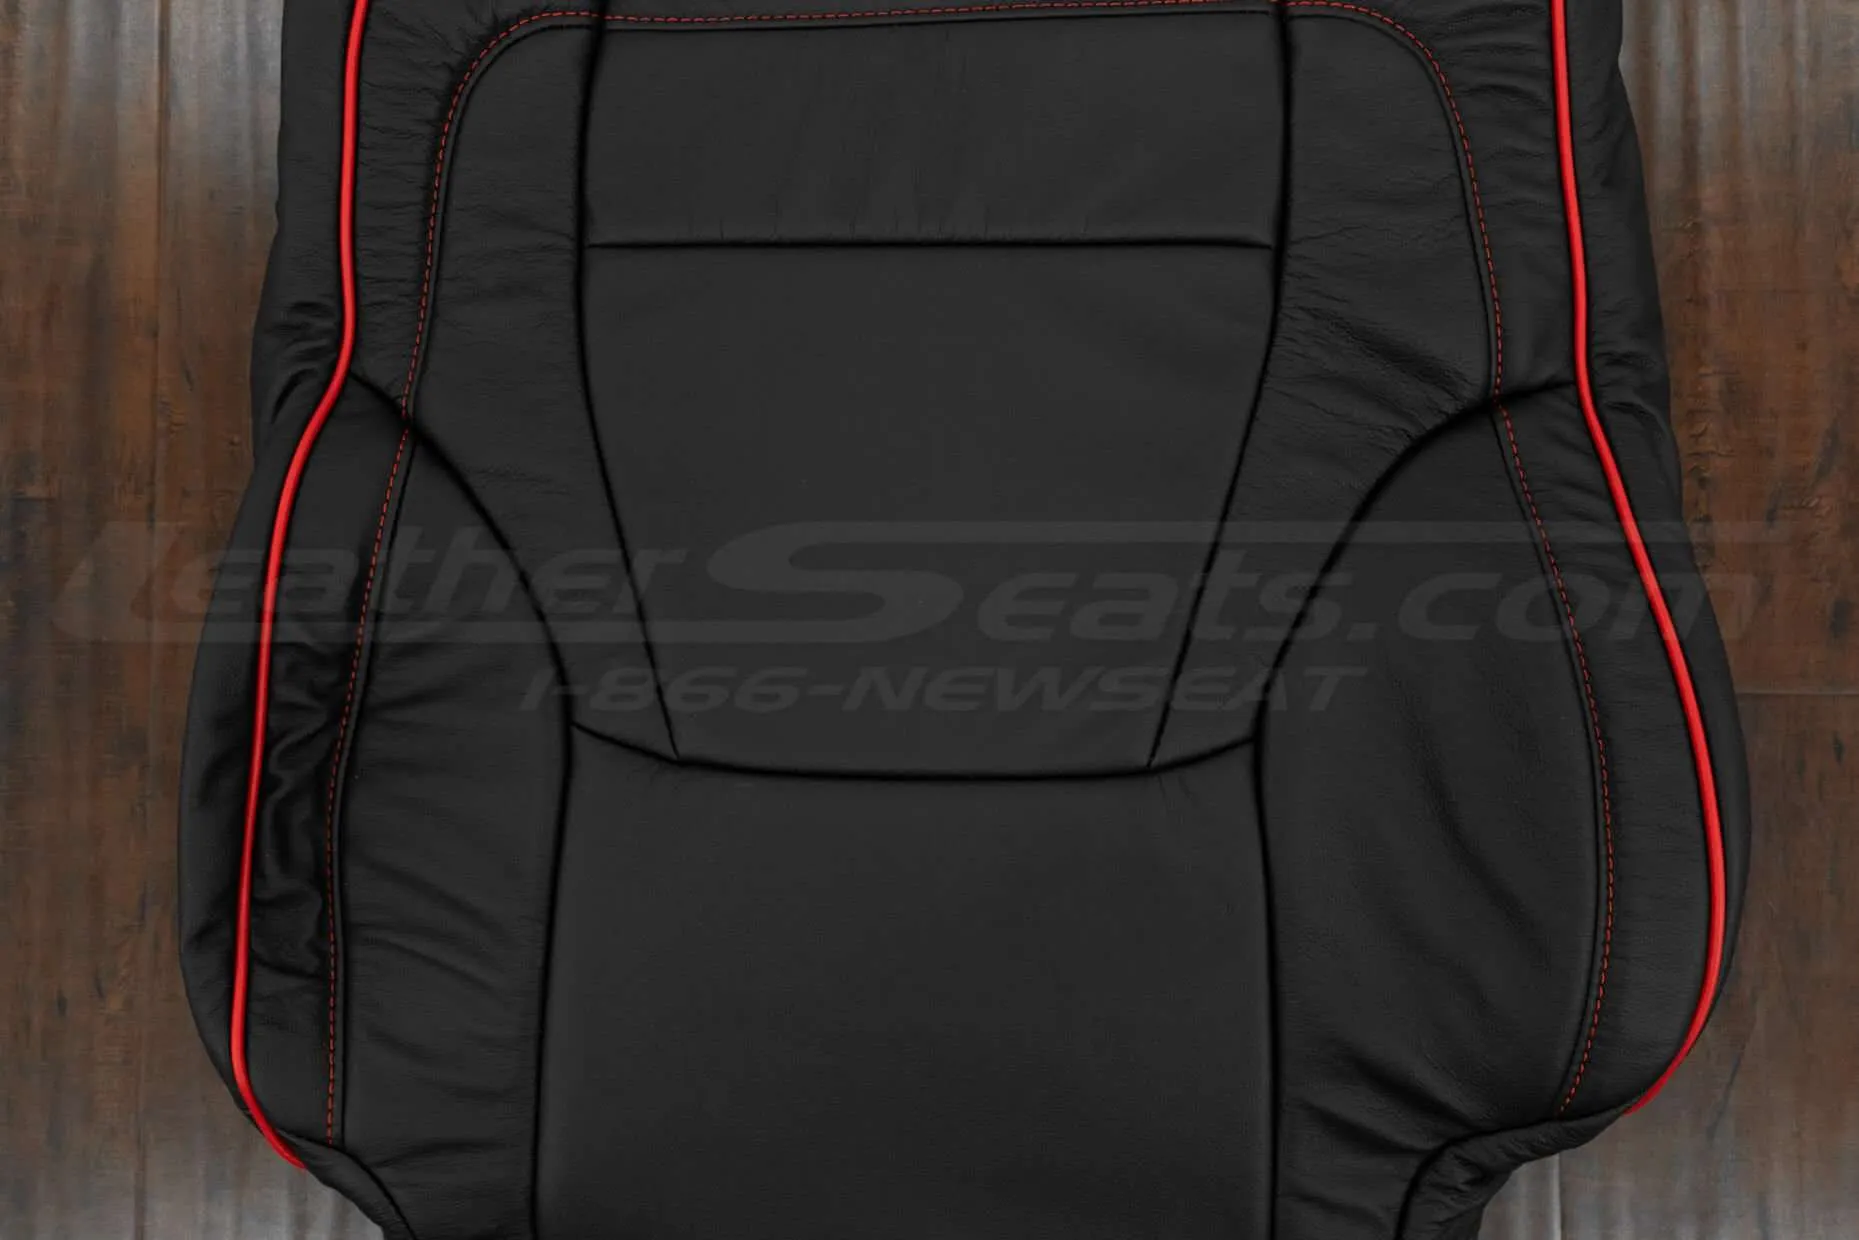 Insert section of leather backrest upholstery